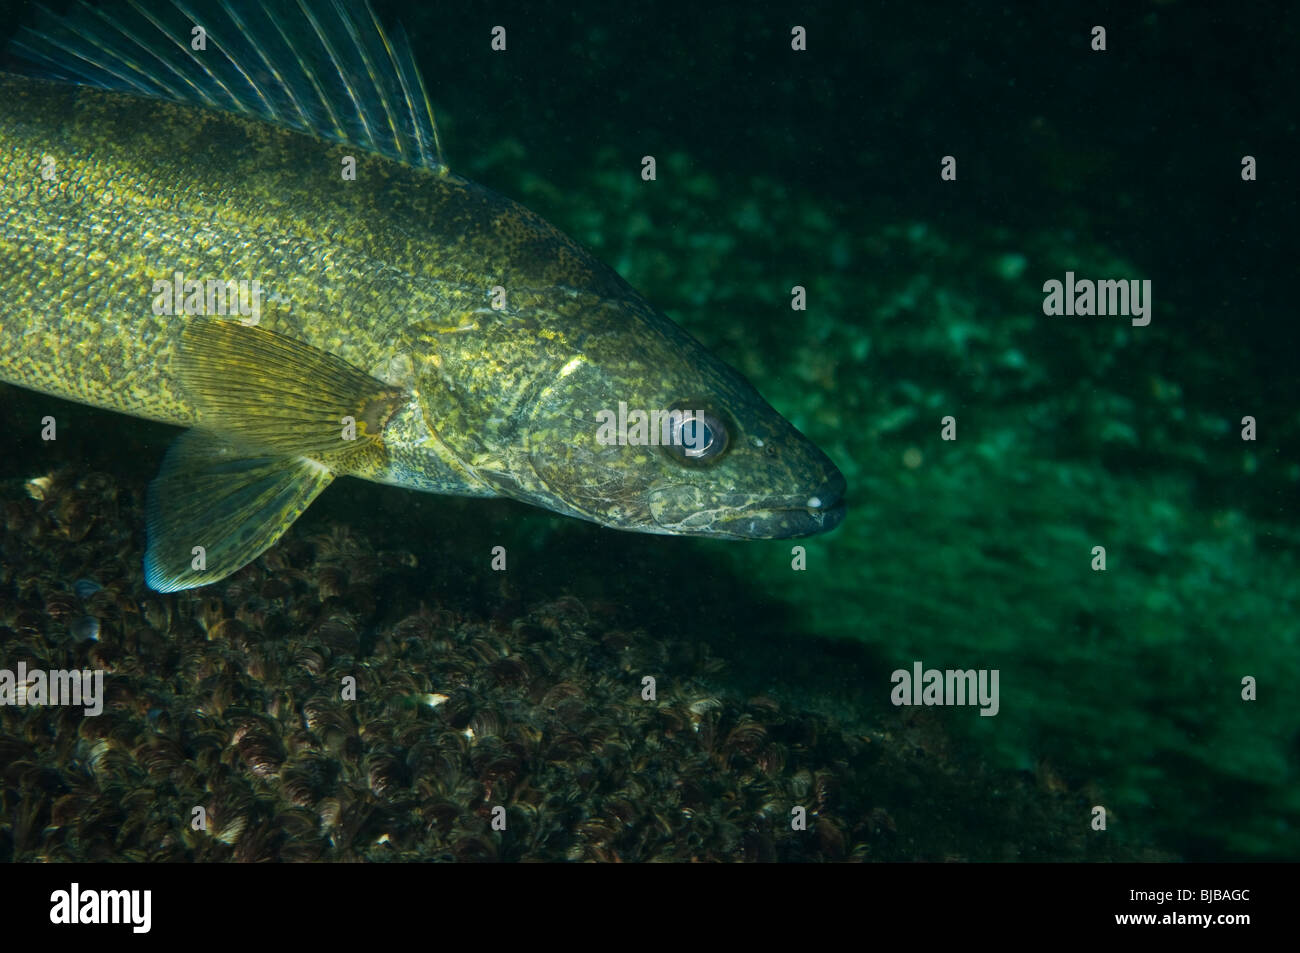 Walleye underwater in the St. Lawrence River in Canada Stock Photo